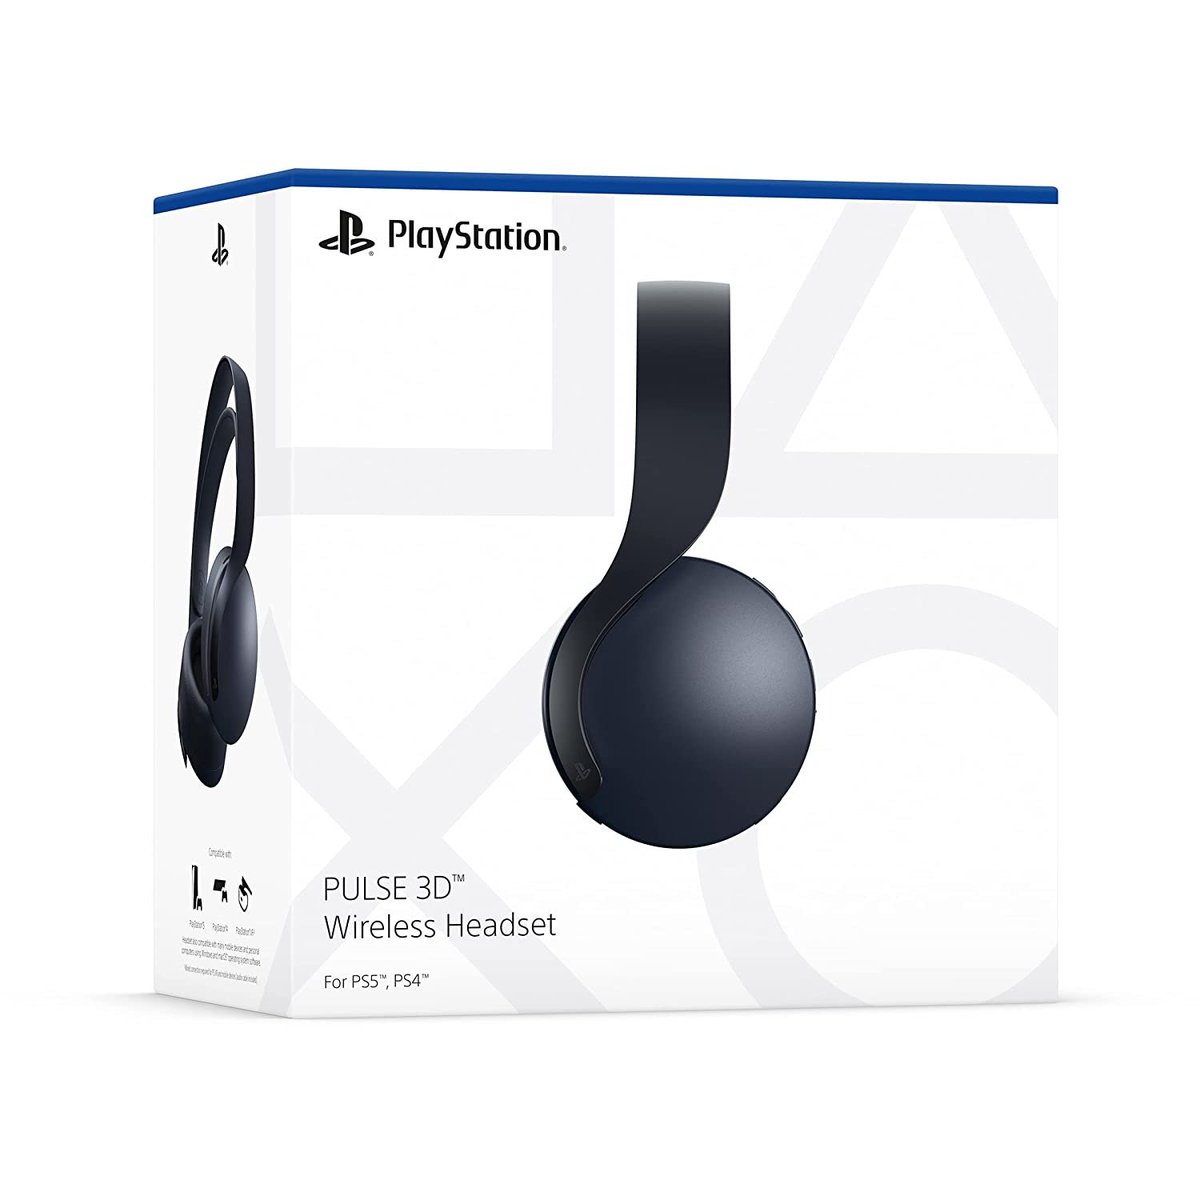 PlayStation PULSE 3D Wireless Headset – Midnight Black Version (Release date: November 5, 2021) Preorder Black PULSE 3D now : 🇺🇸 amzn.to/3pQLH4w 🇨🇦 amzn.to/2ZzM4FX 🇬🇧 amzn.to/2ZBXYPe #PS5 #PlayStation5